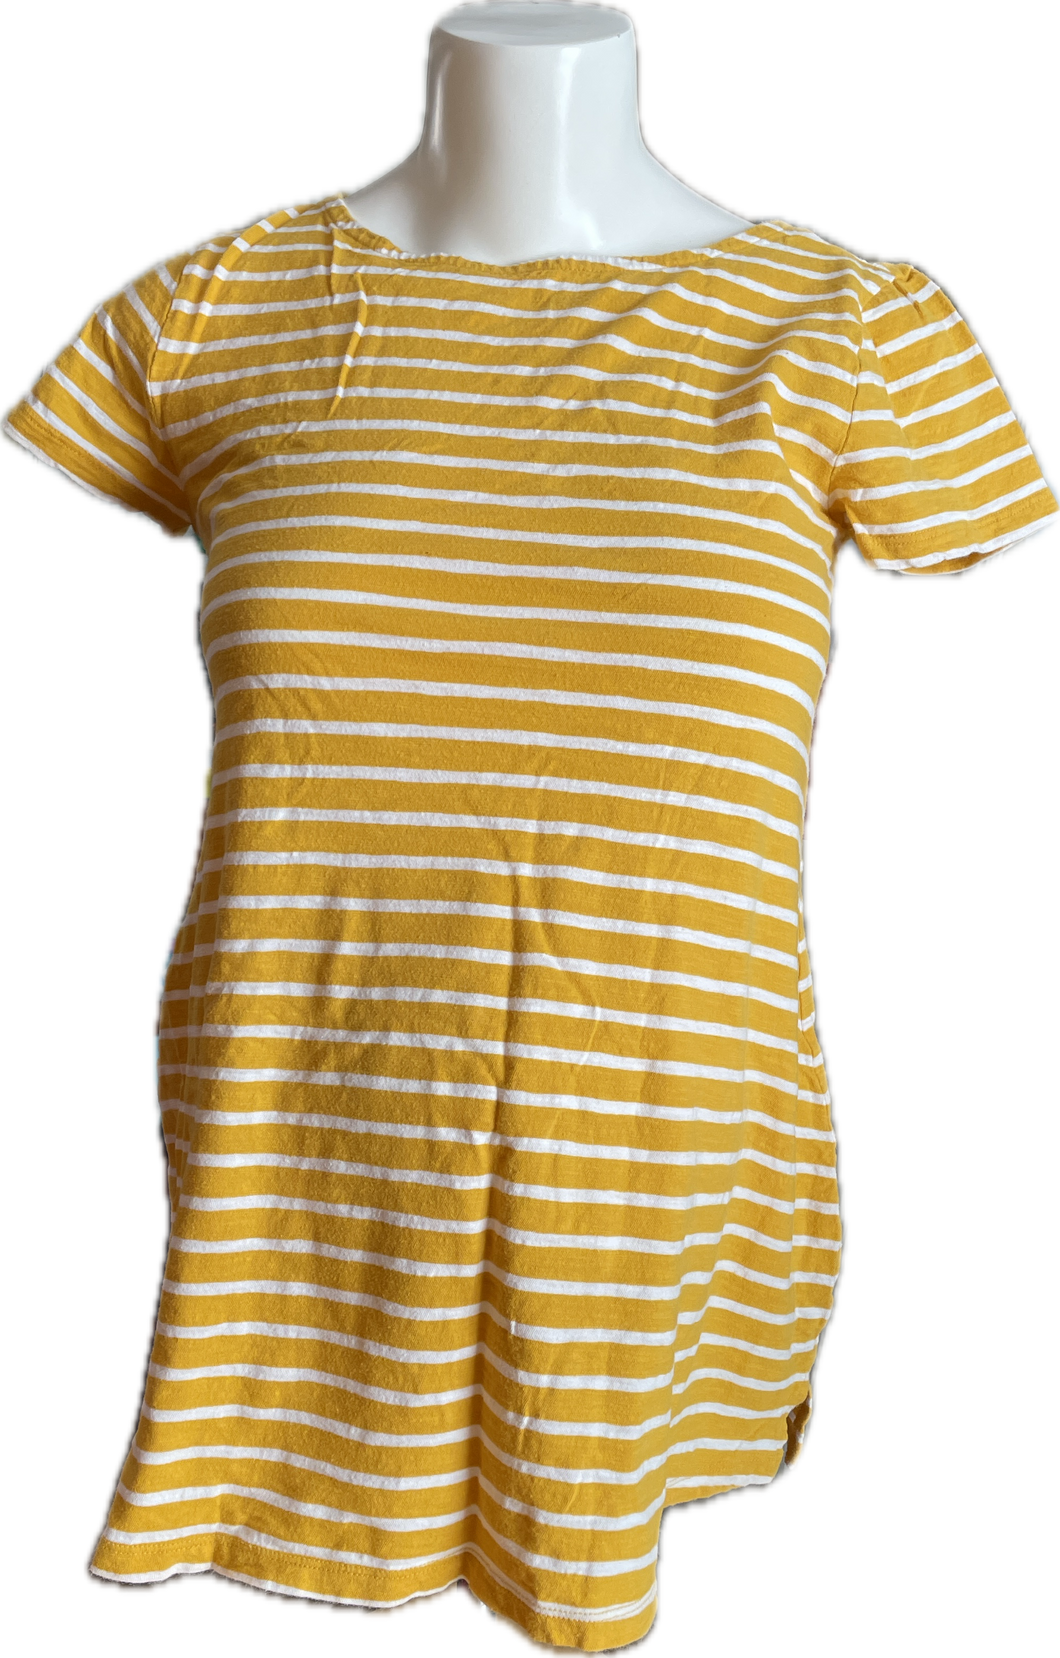 M Old Navy Maternity Top Mustard and White Stripe